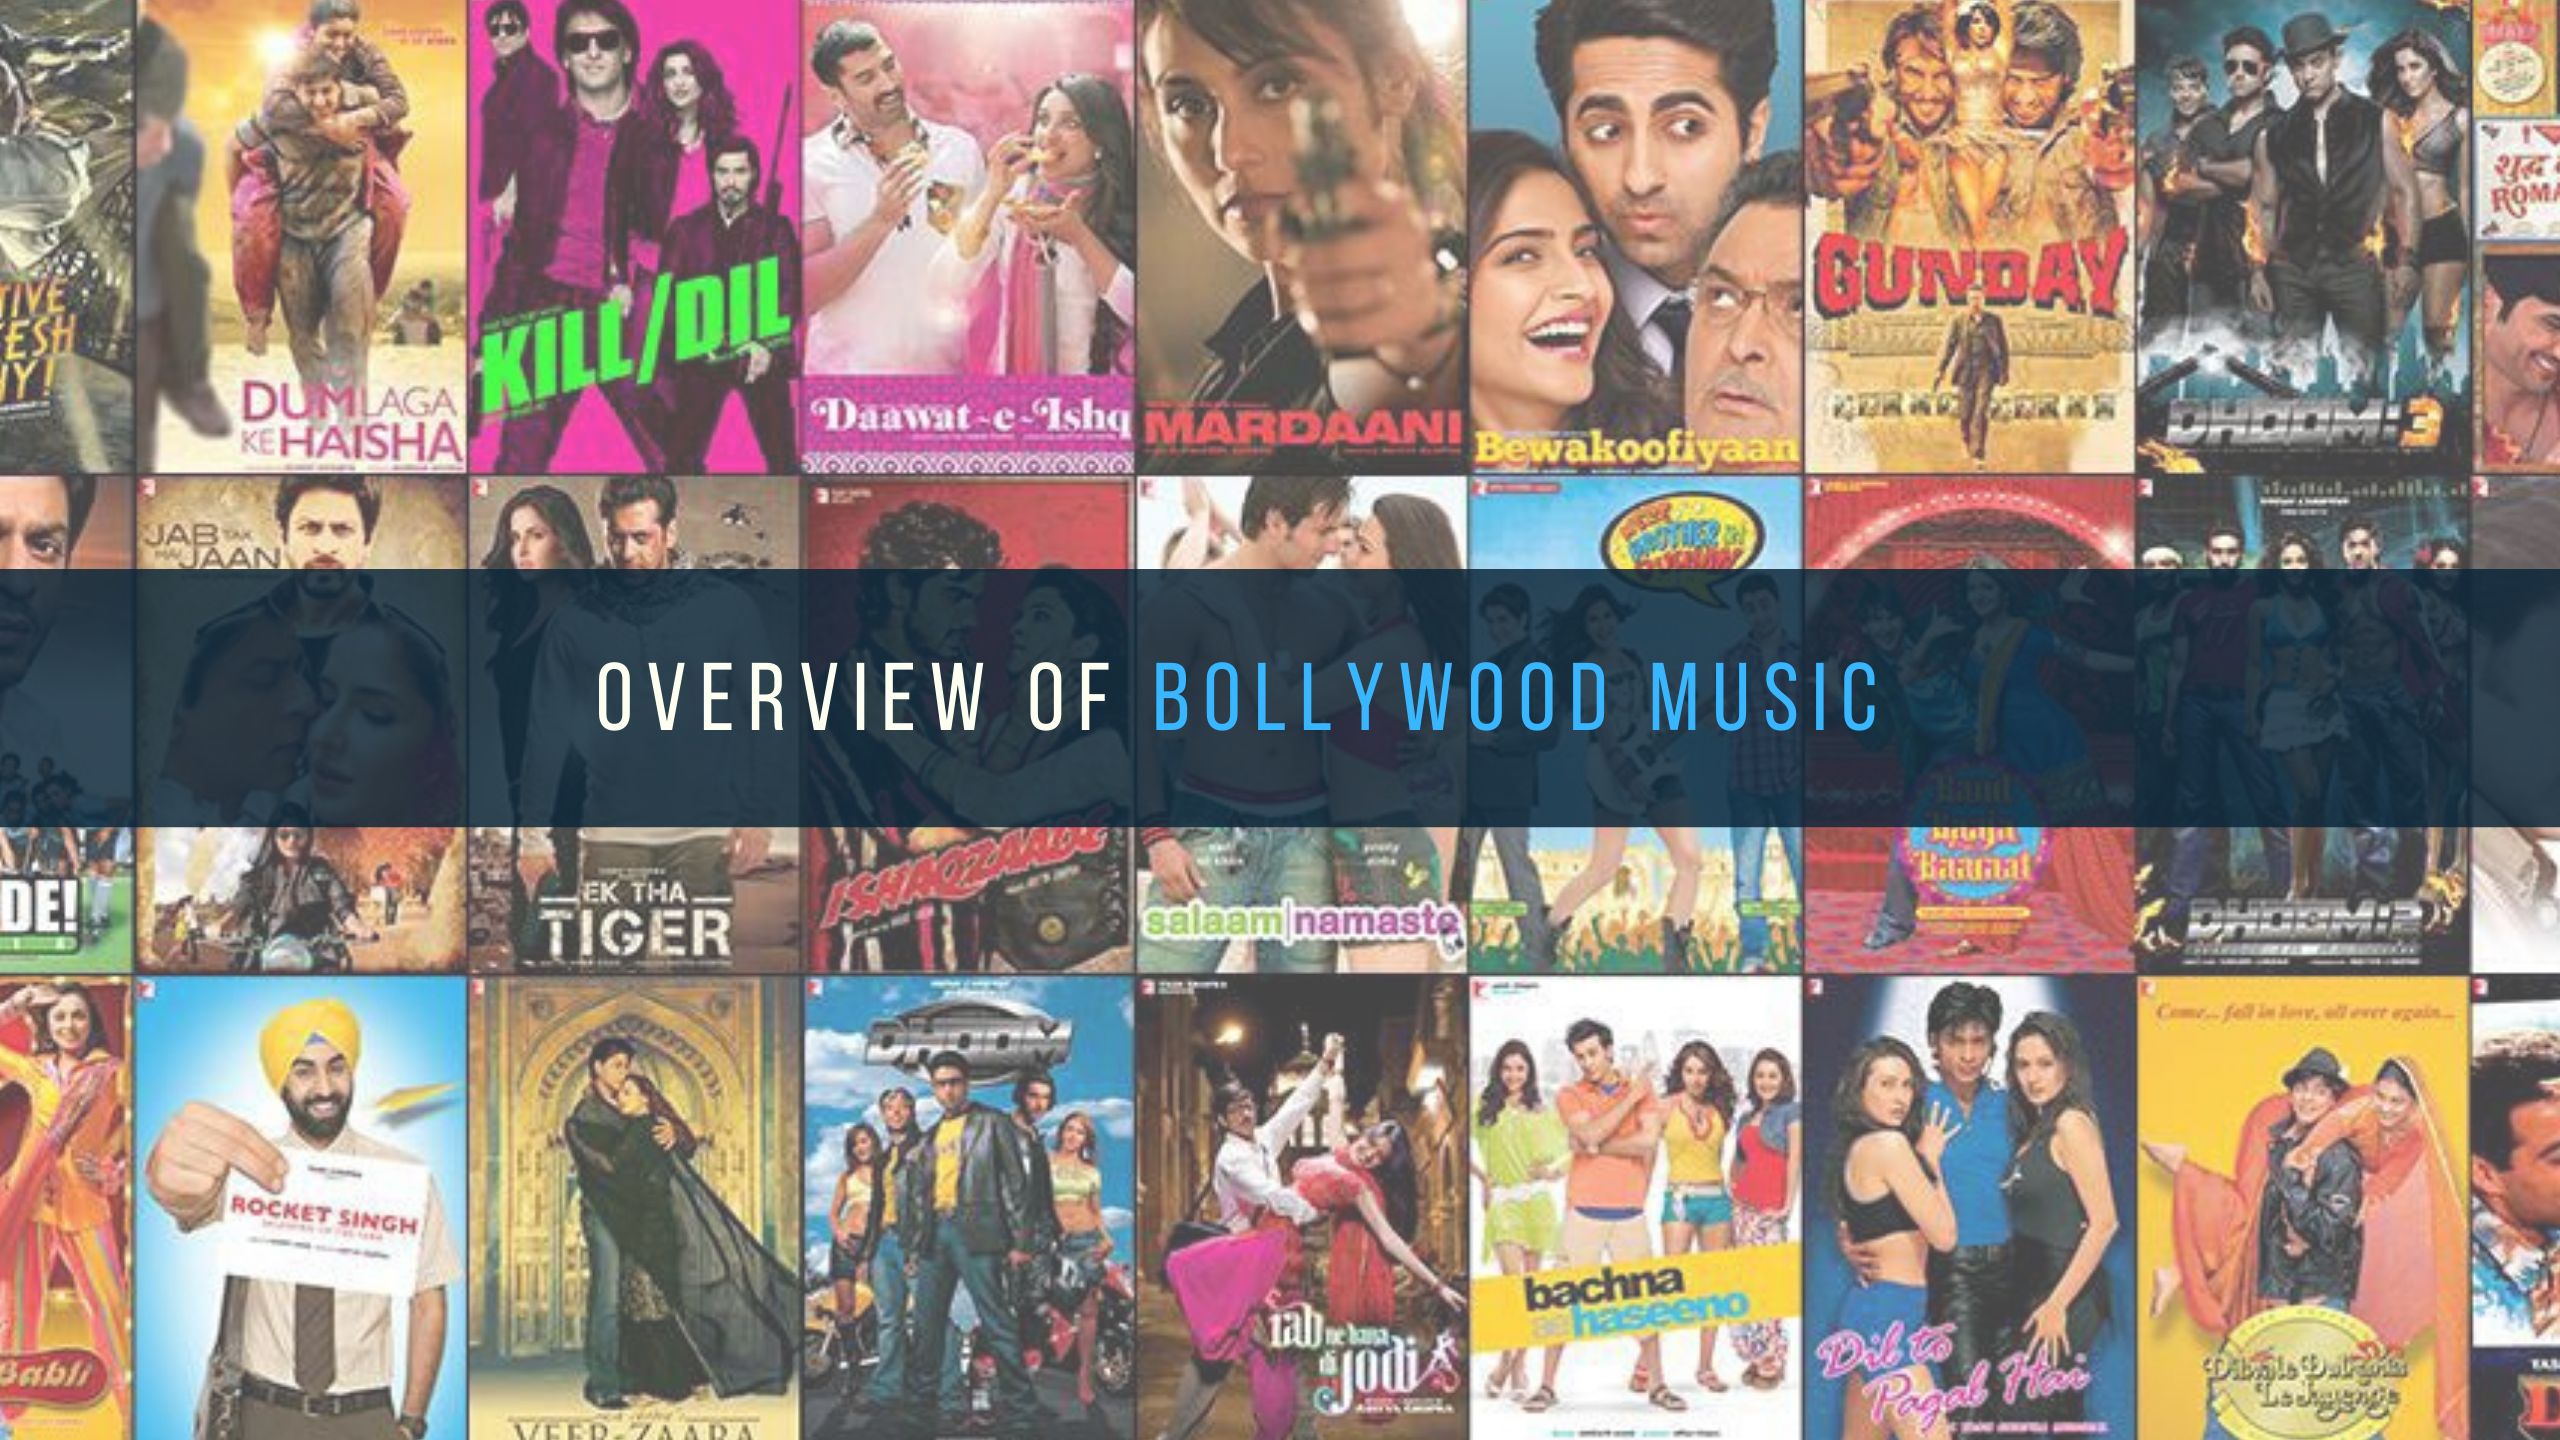 About Bollywood Music